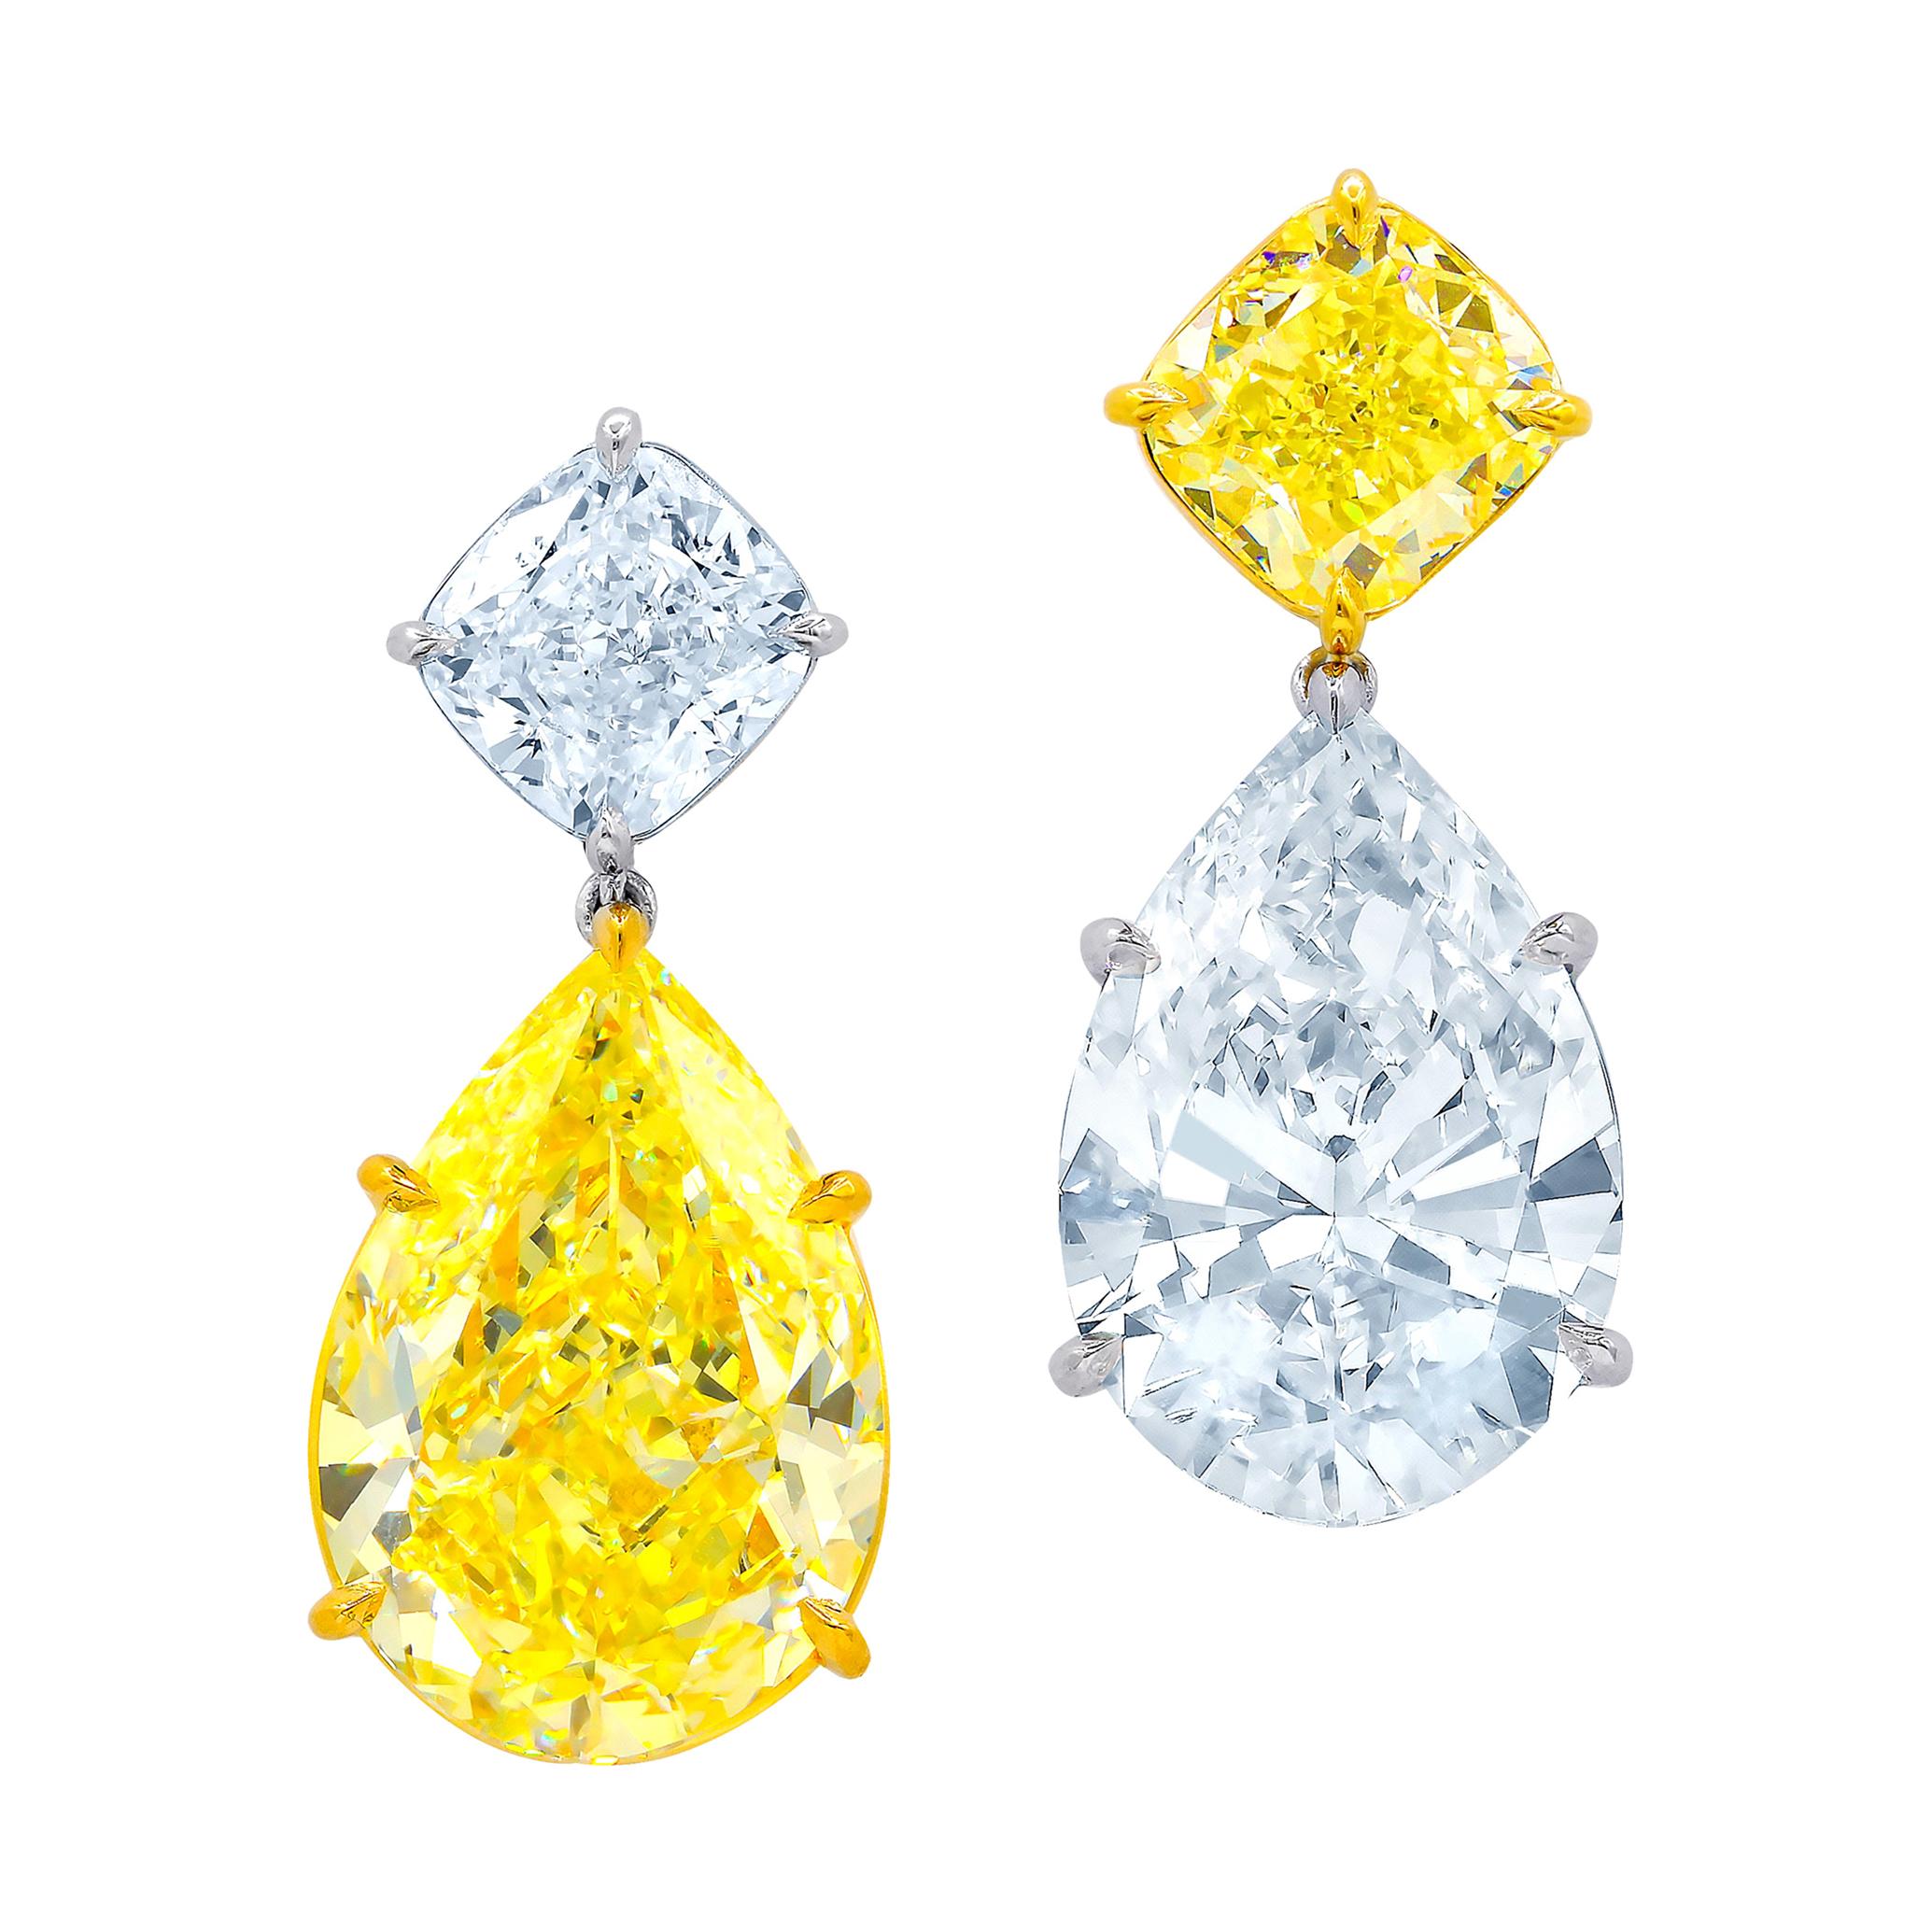 Magnificent 18kt and Platinum Pear Shape Diamond Earrings